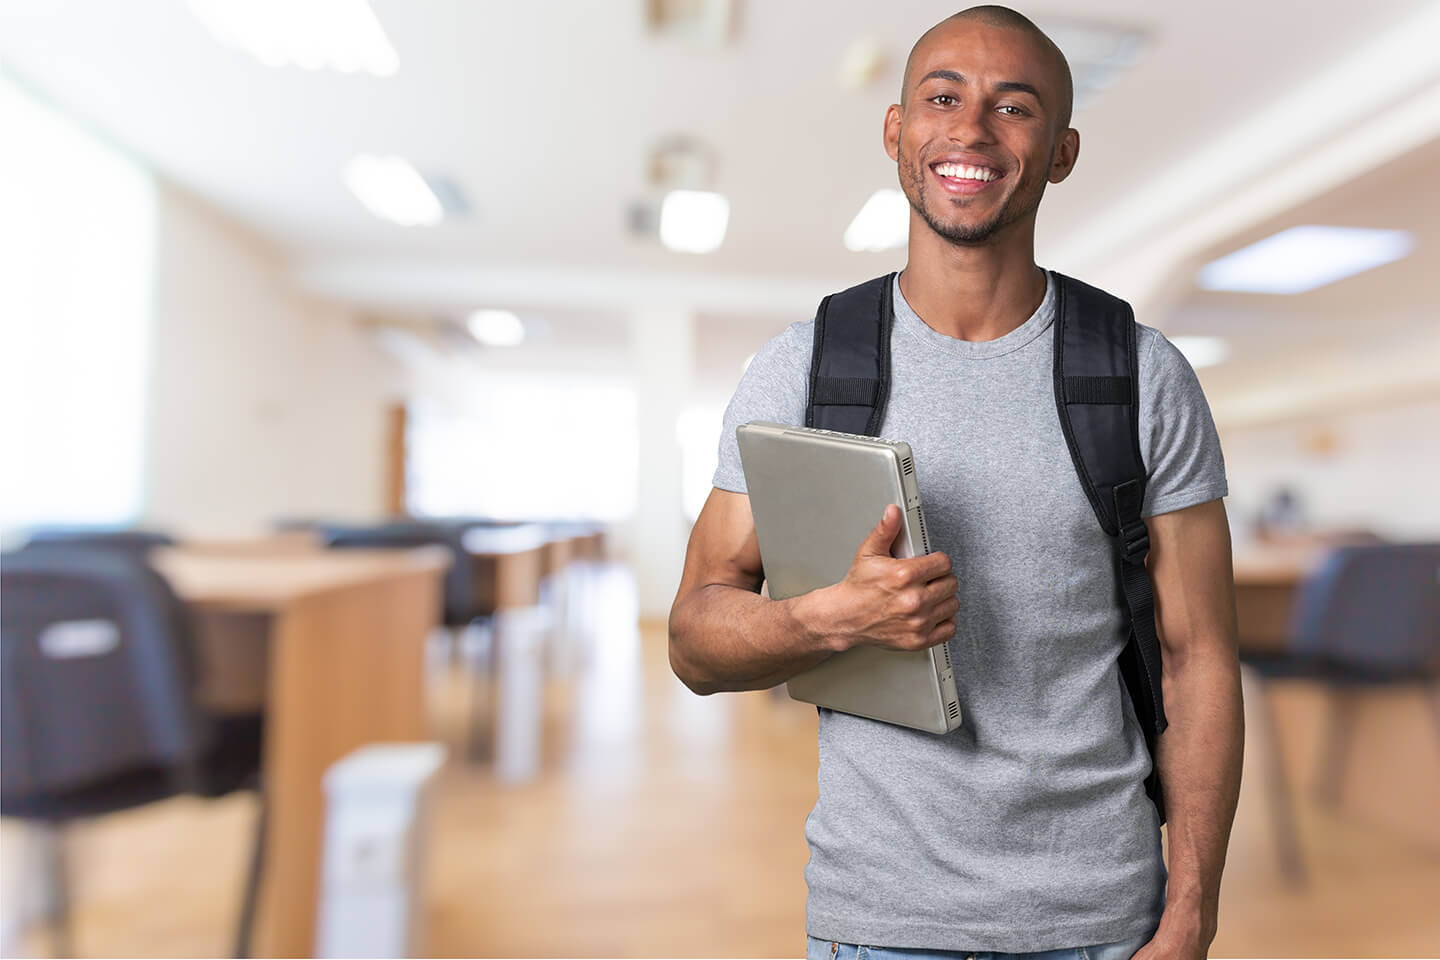 Student with backpack and laptop